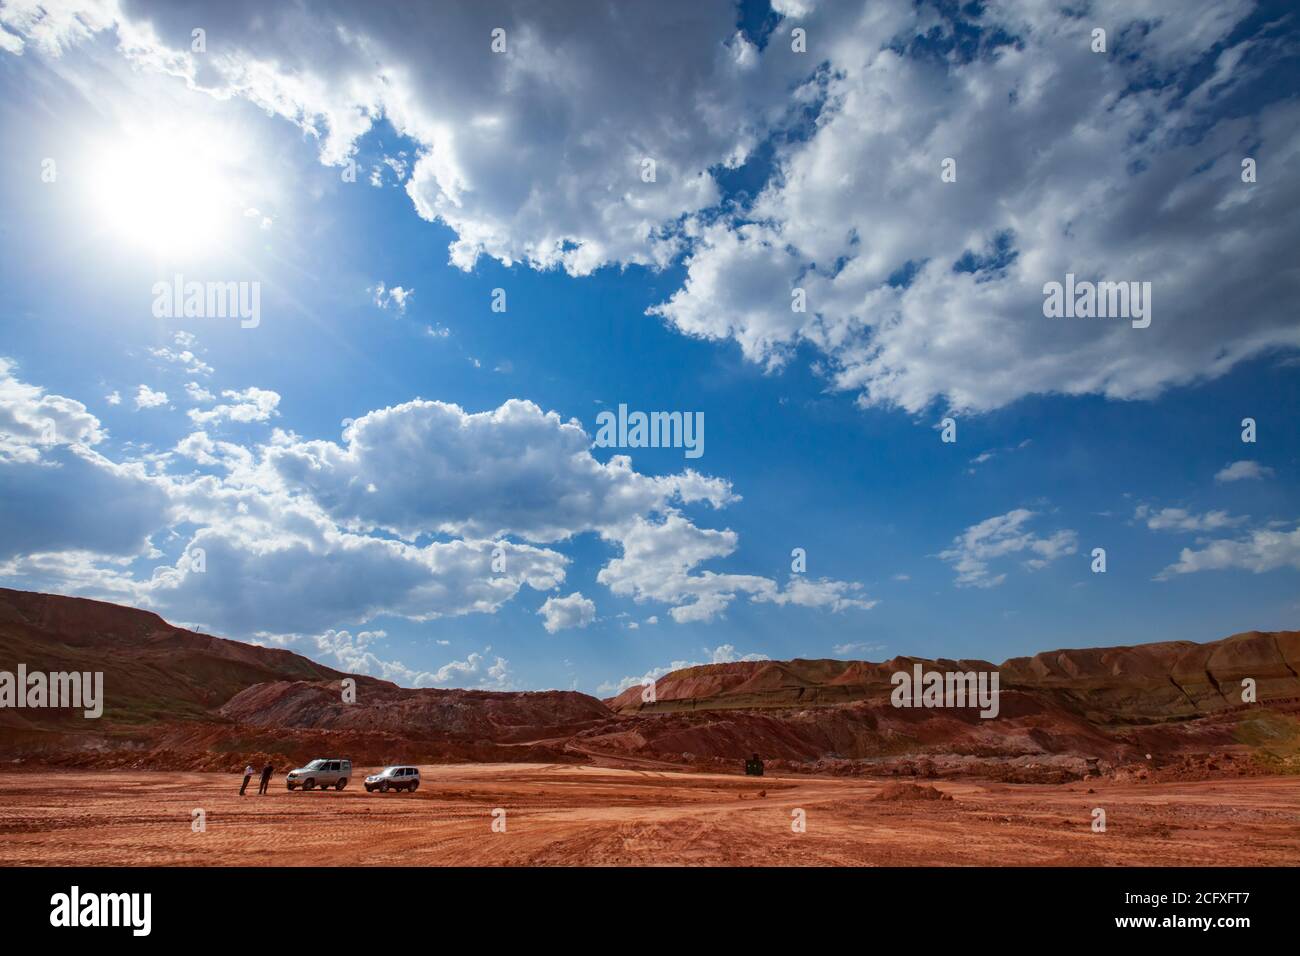 Red bauxite clay. Aluminium ore mining. Quarry of red ground on blue sky with clouds. Two off-road cars and two people. Stock Photo